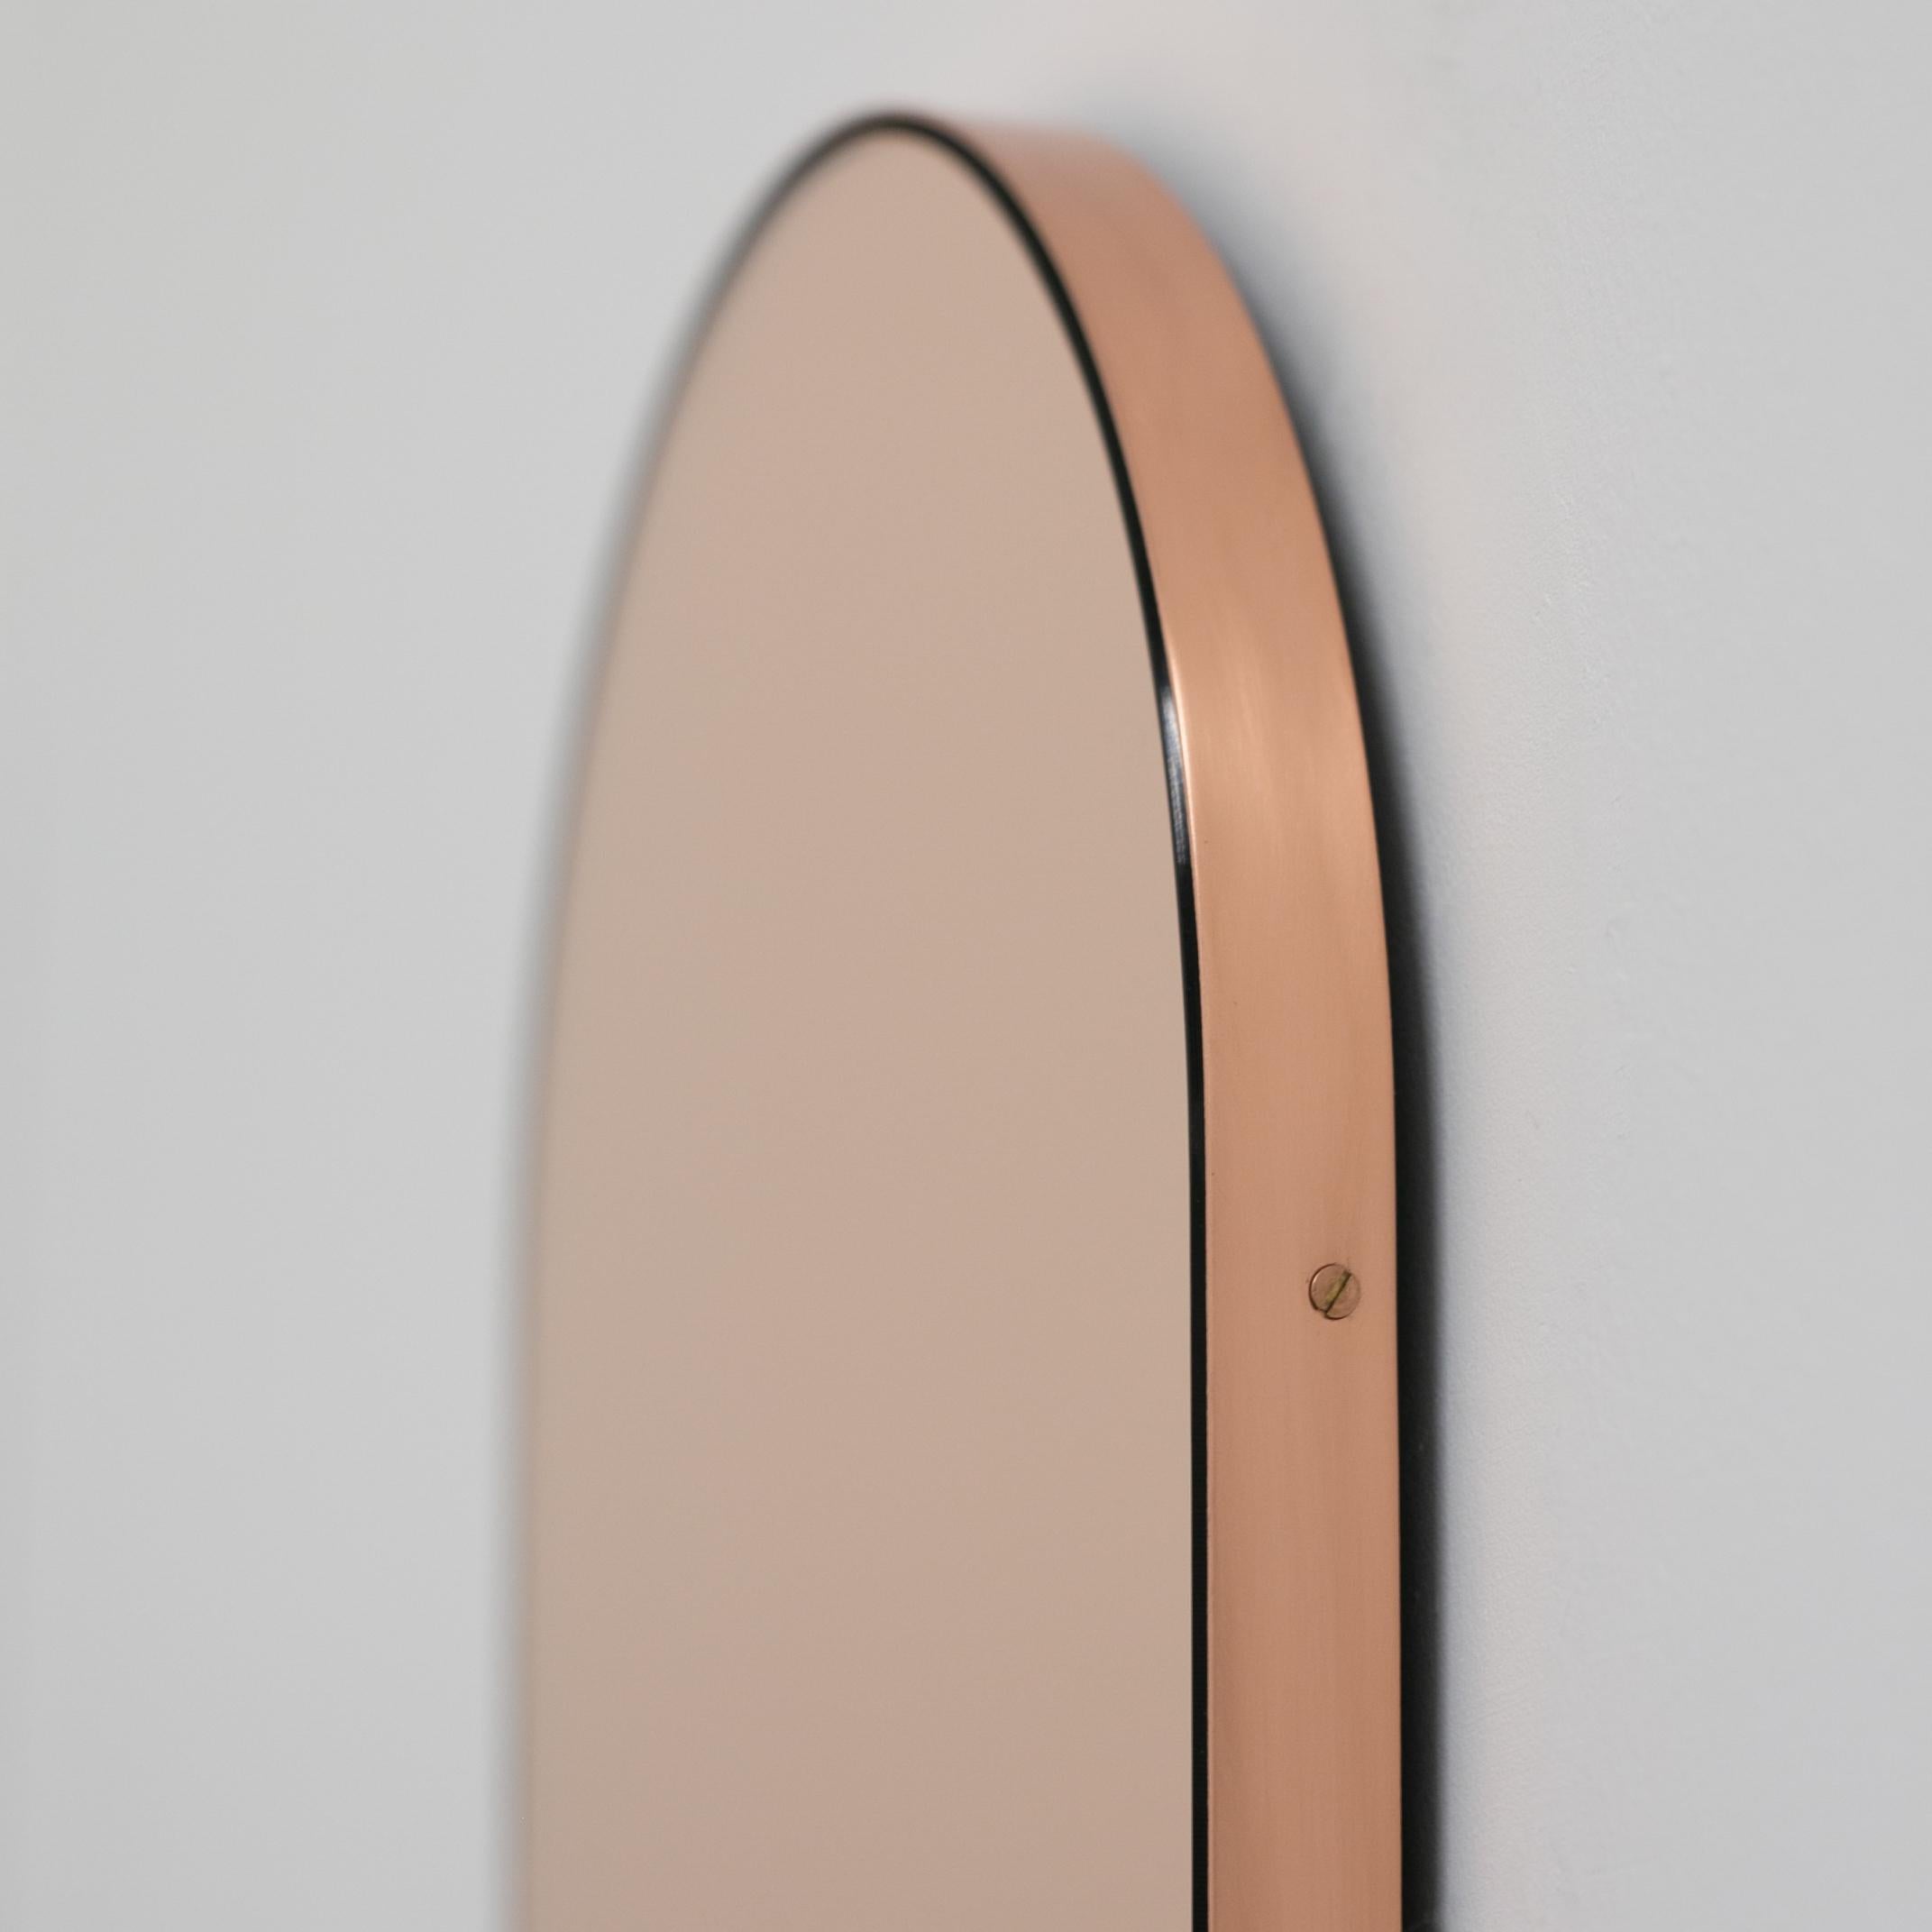 Contemporary capsule shaped rose gold or peach mirror with an elegant copper frame. Designed and handcrafted in London, UK. The detailing and finish, including visible copper-plated screws, emphasise the craft and quality feel of the mirror, a true